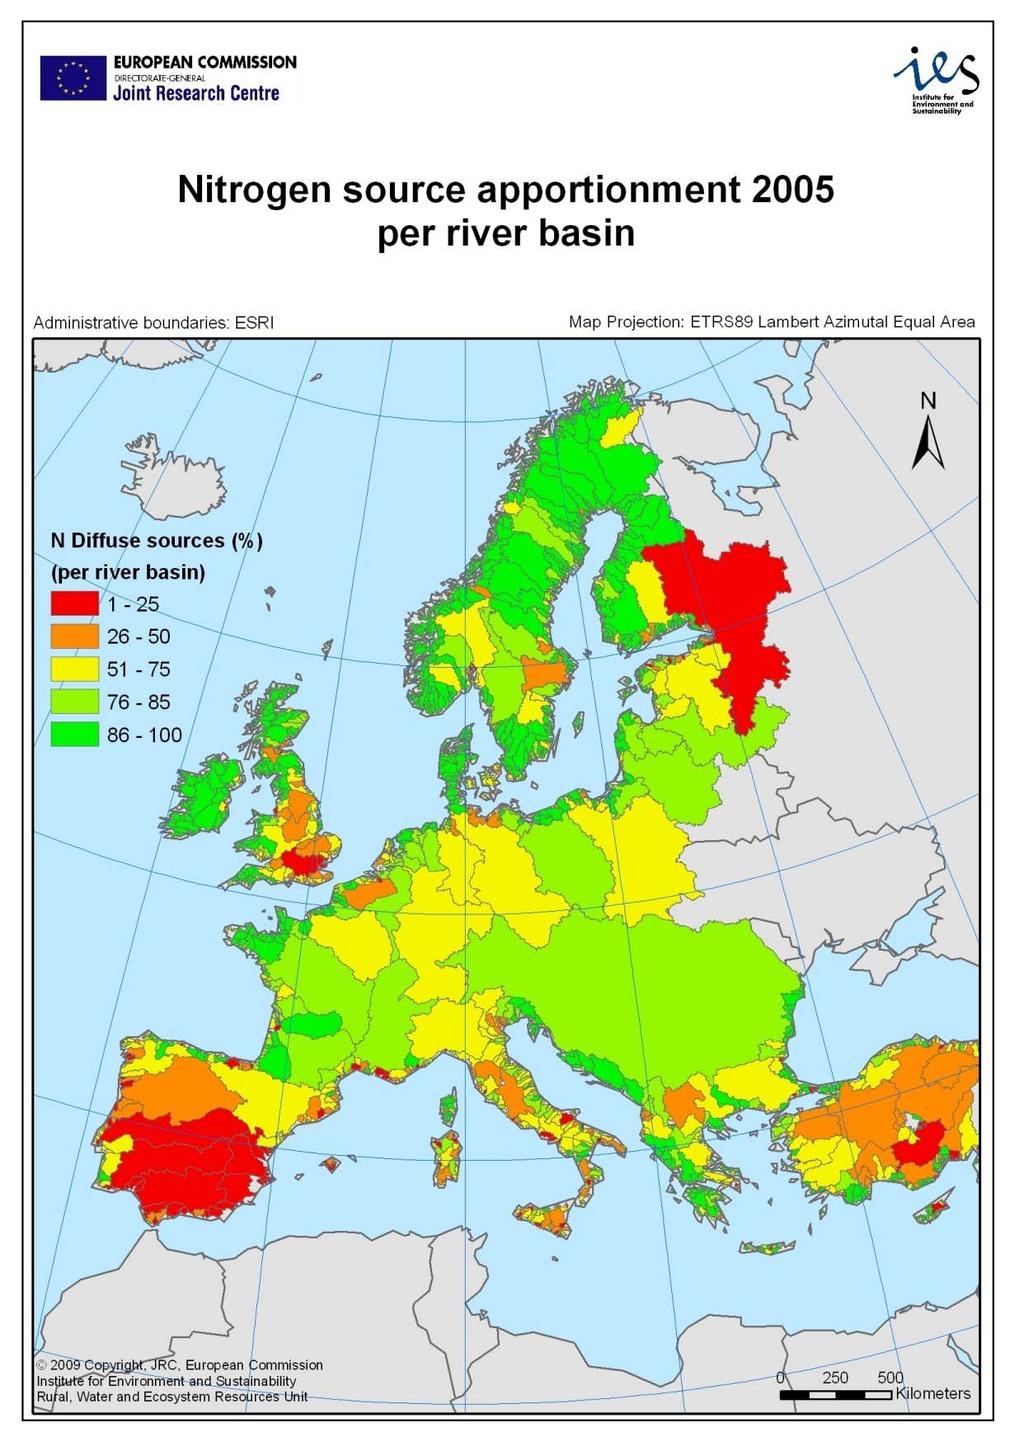 Map 7. Estimation of nitrogen source apportionment for Europe (Bouraoui F., Grizzetti B.